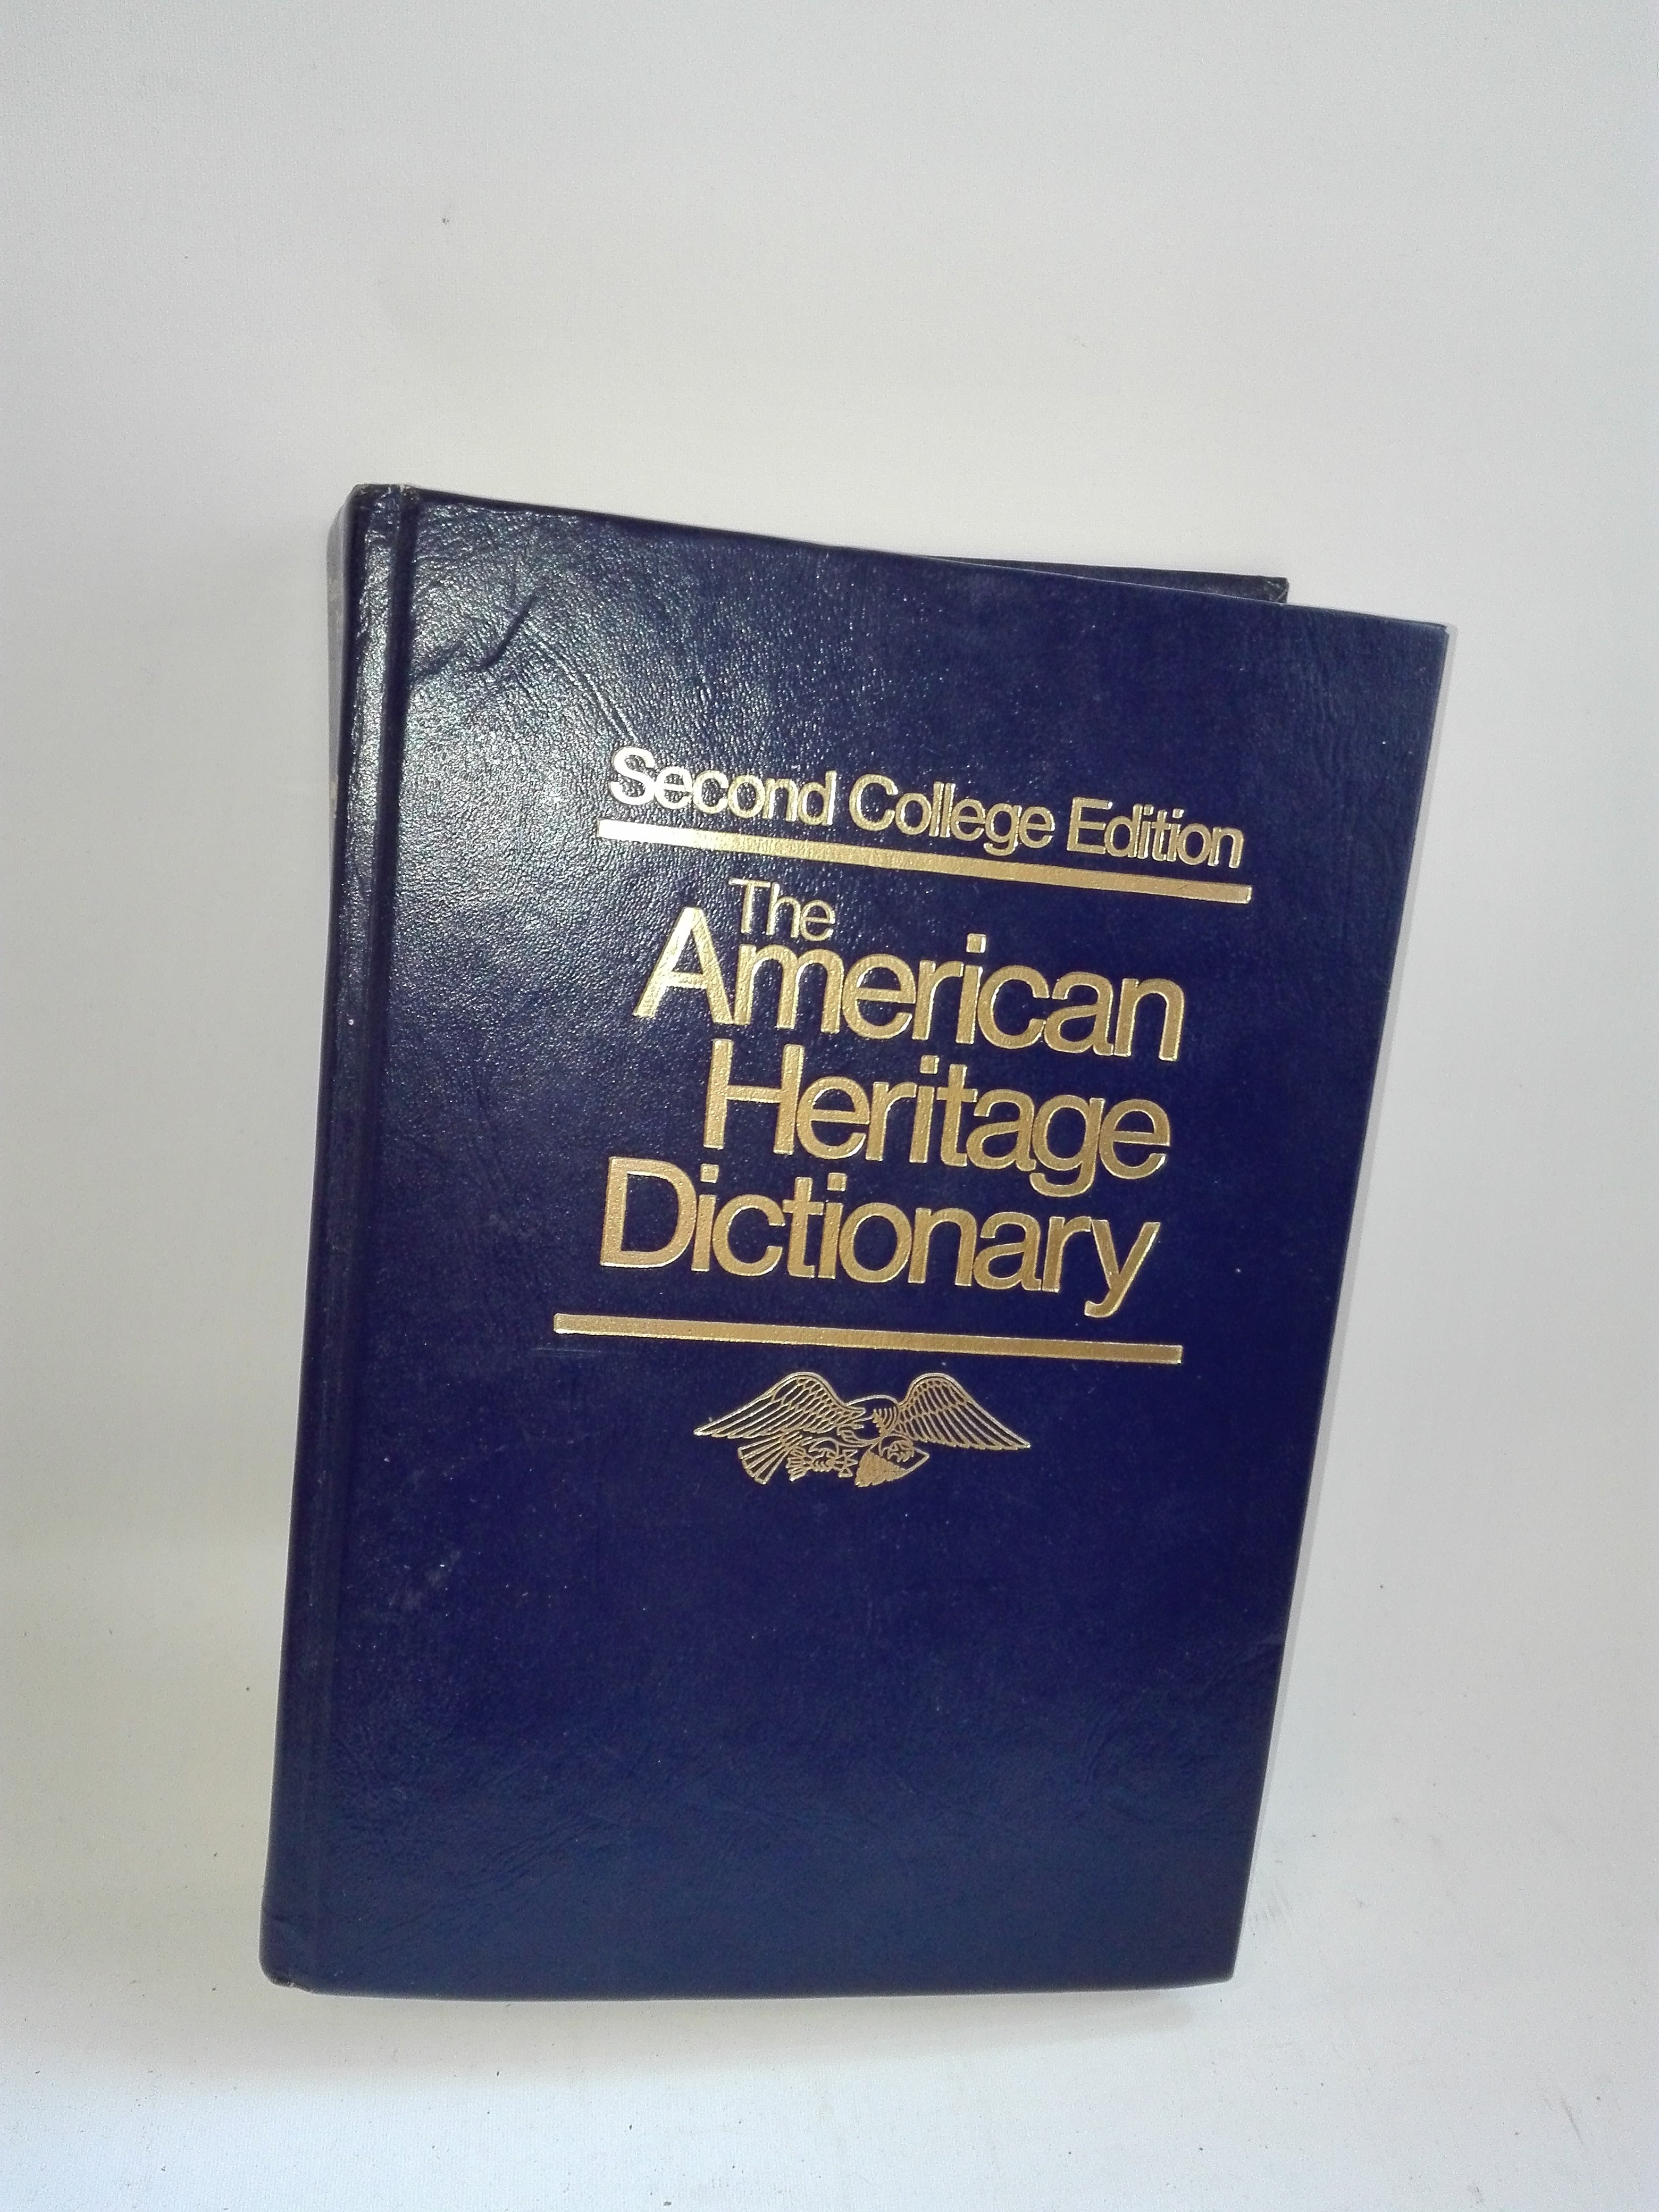 Second College Edition The American Heritage Dictionary Hardcover Book